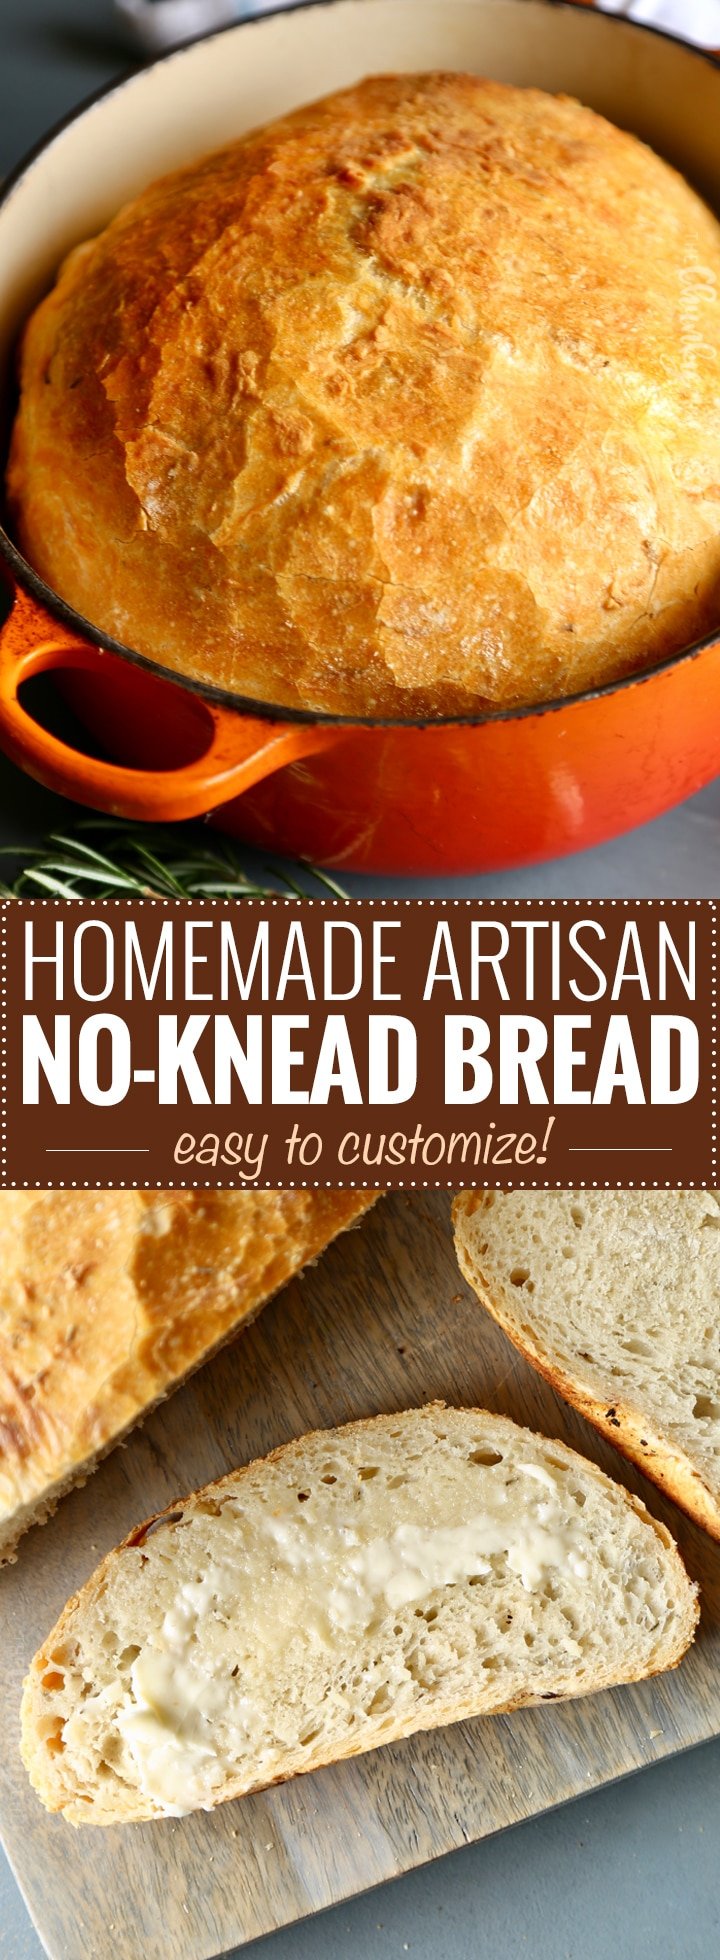 Homemade Artisan No-Knead Bread | Perfectly crusty on the outside, with a soft fluffy inside, this no-knead bread is perfect with any dinner! | https://thechunkychef.com